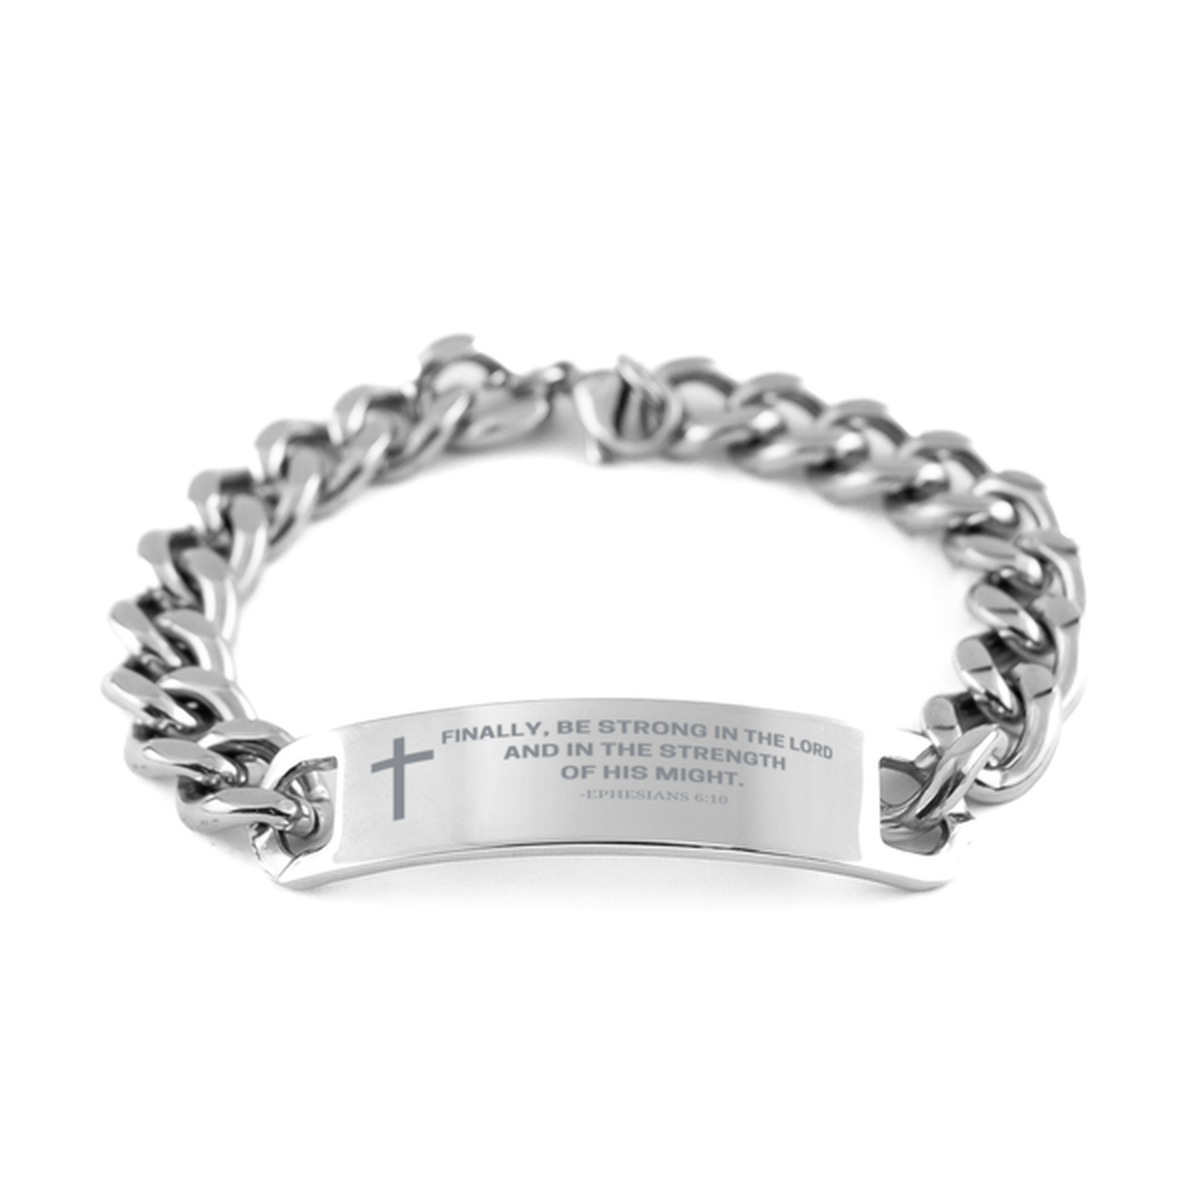 Baptism Gifts For Teenage Boys Girls, Christian Bible Verse Cuban Chain Bracelet, Finally, be strong in the Lord Catholic Confirmation Gifts for Son, Godson, Grandson, Nephew